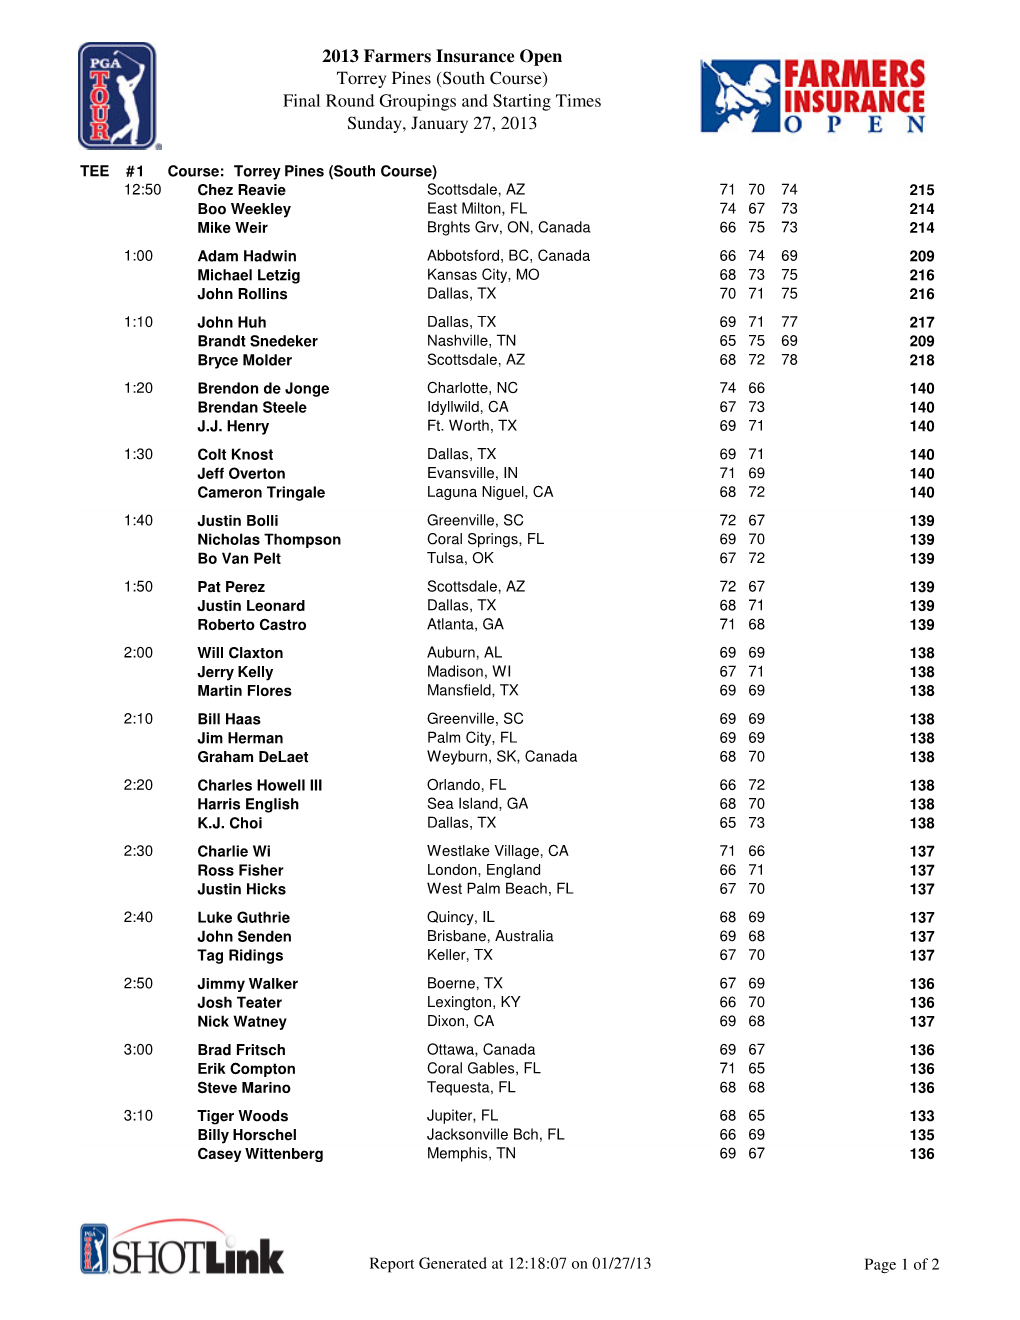 2013 Farmers Insurance Open Torrey Pines (South Course) Final Round Groupings and Starting Times Sunday, January 27, 2013